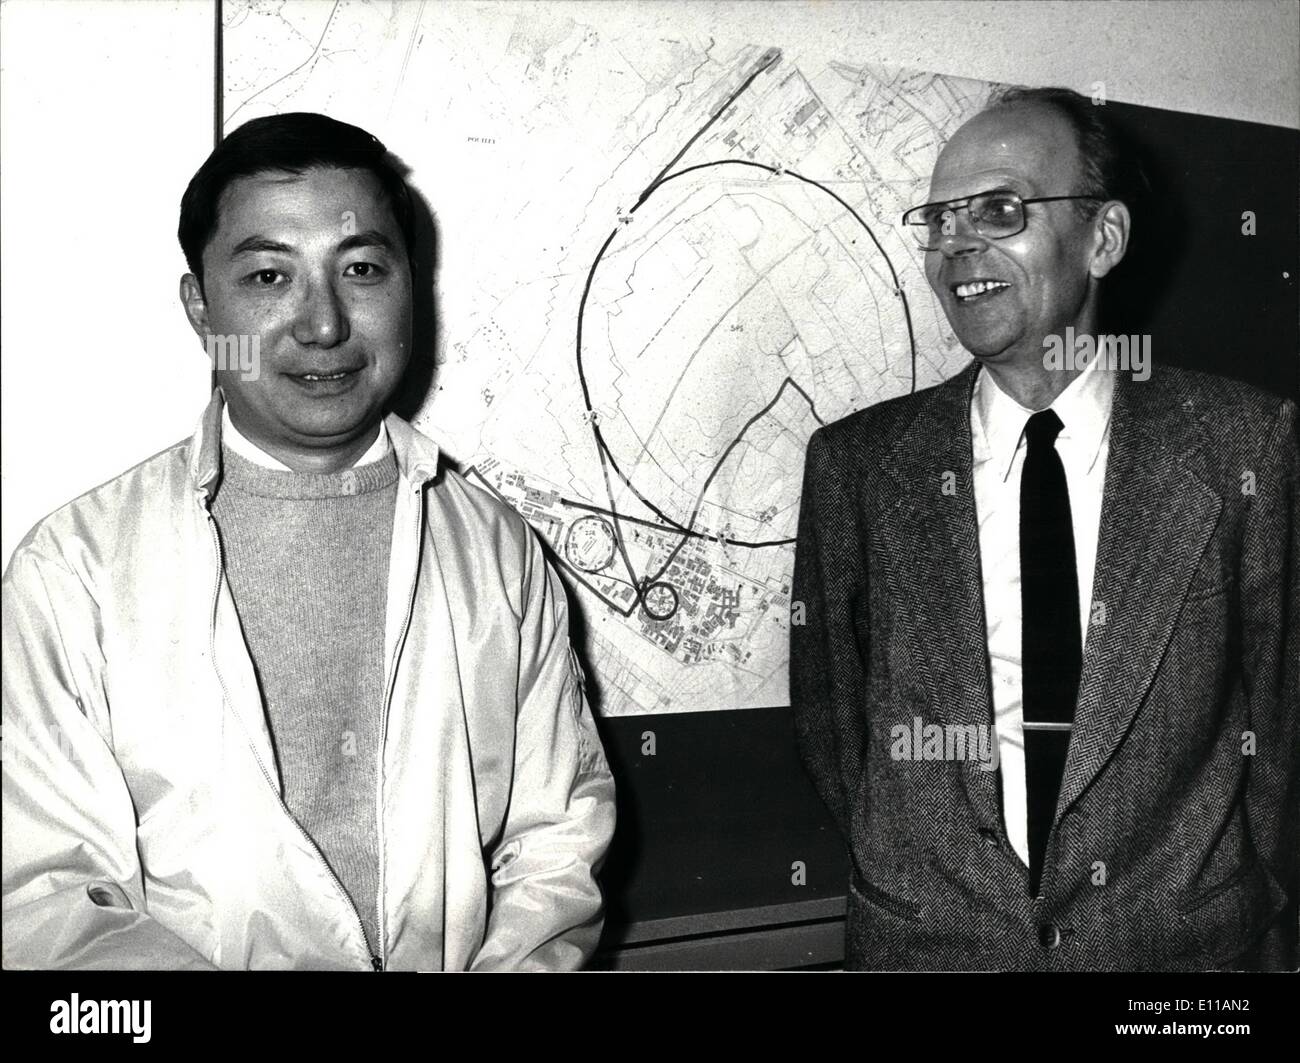 Oct. 10, 1976 - Physics-Nobel-Prize-winner Ting at Geneva: The winner of this year's physics-noble-prize, Mr. Samuel Ting, got the good news at Geneva, where he is working at the CERN-Center. Photo Shows Professor Ting (left) in front of a map, showing the CERN-Center at the Swiss-French-border near Geneva with Professor Van Hove, CERN-General-director (right) Stock Photo